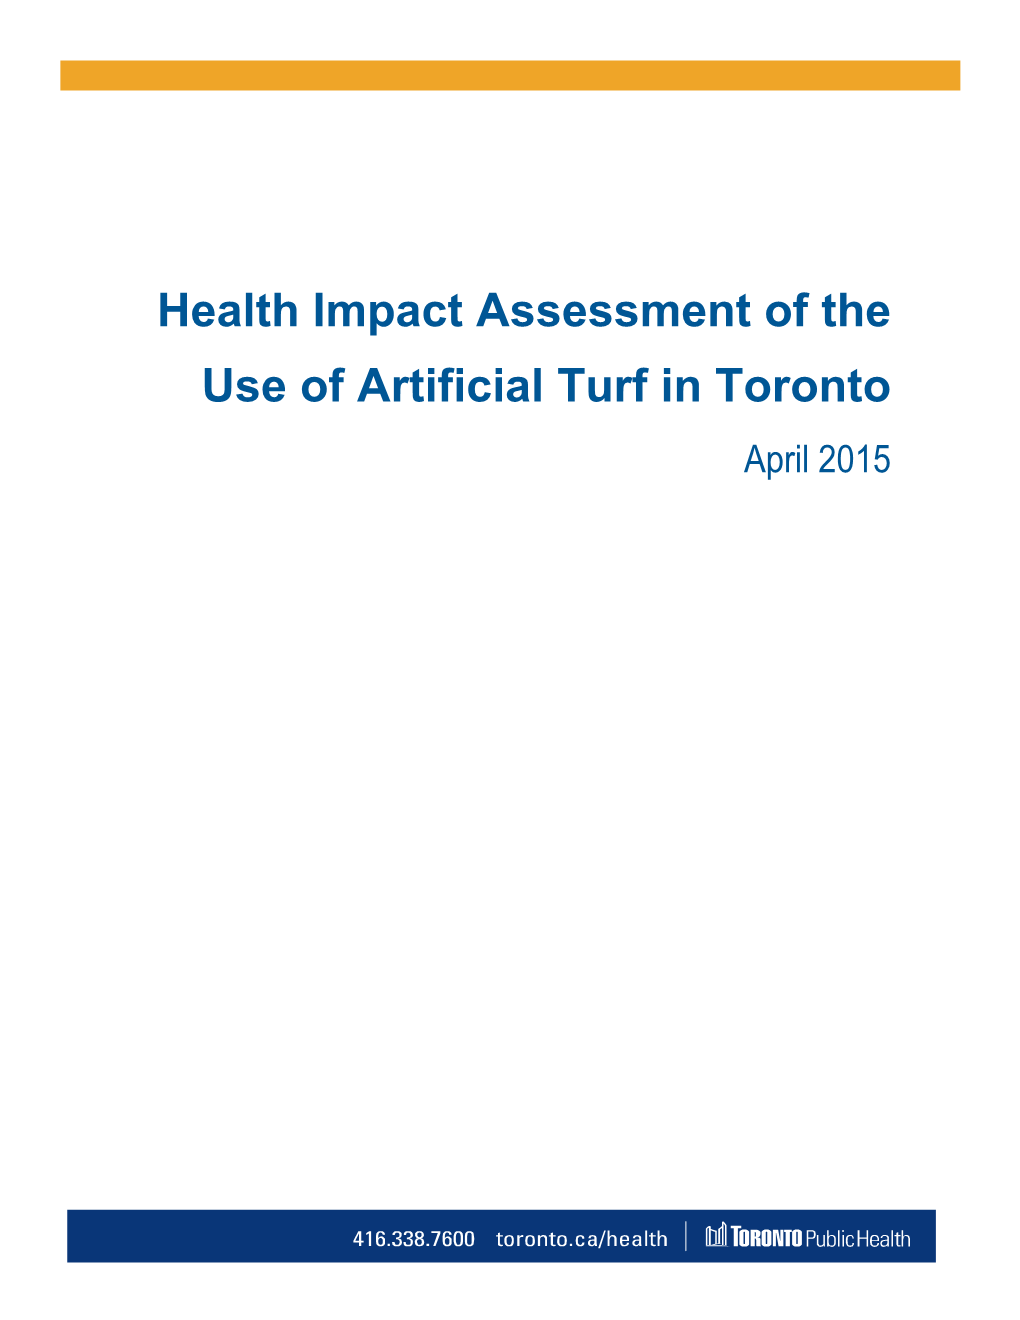 Health Impact Assessment of the Use of Artificial Turf in Toronto April 2015